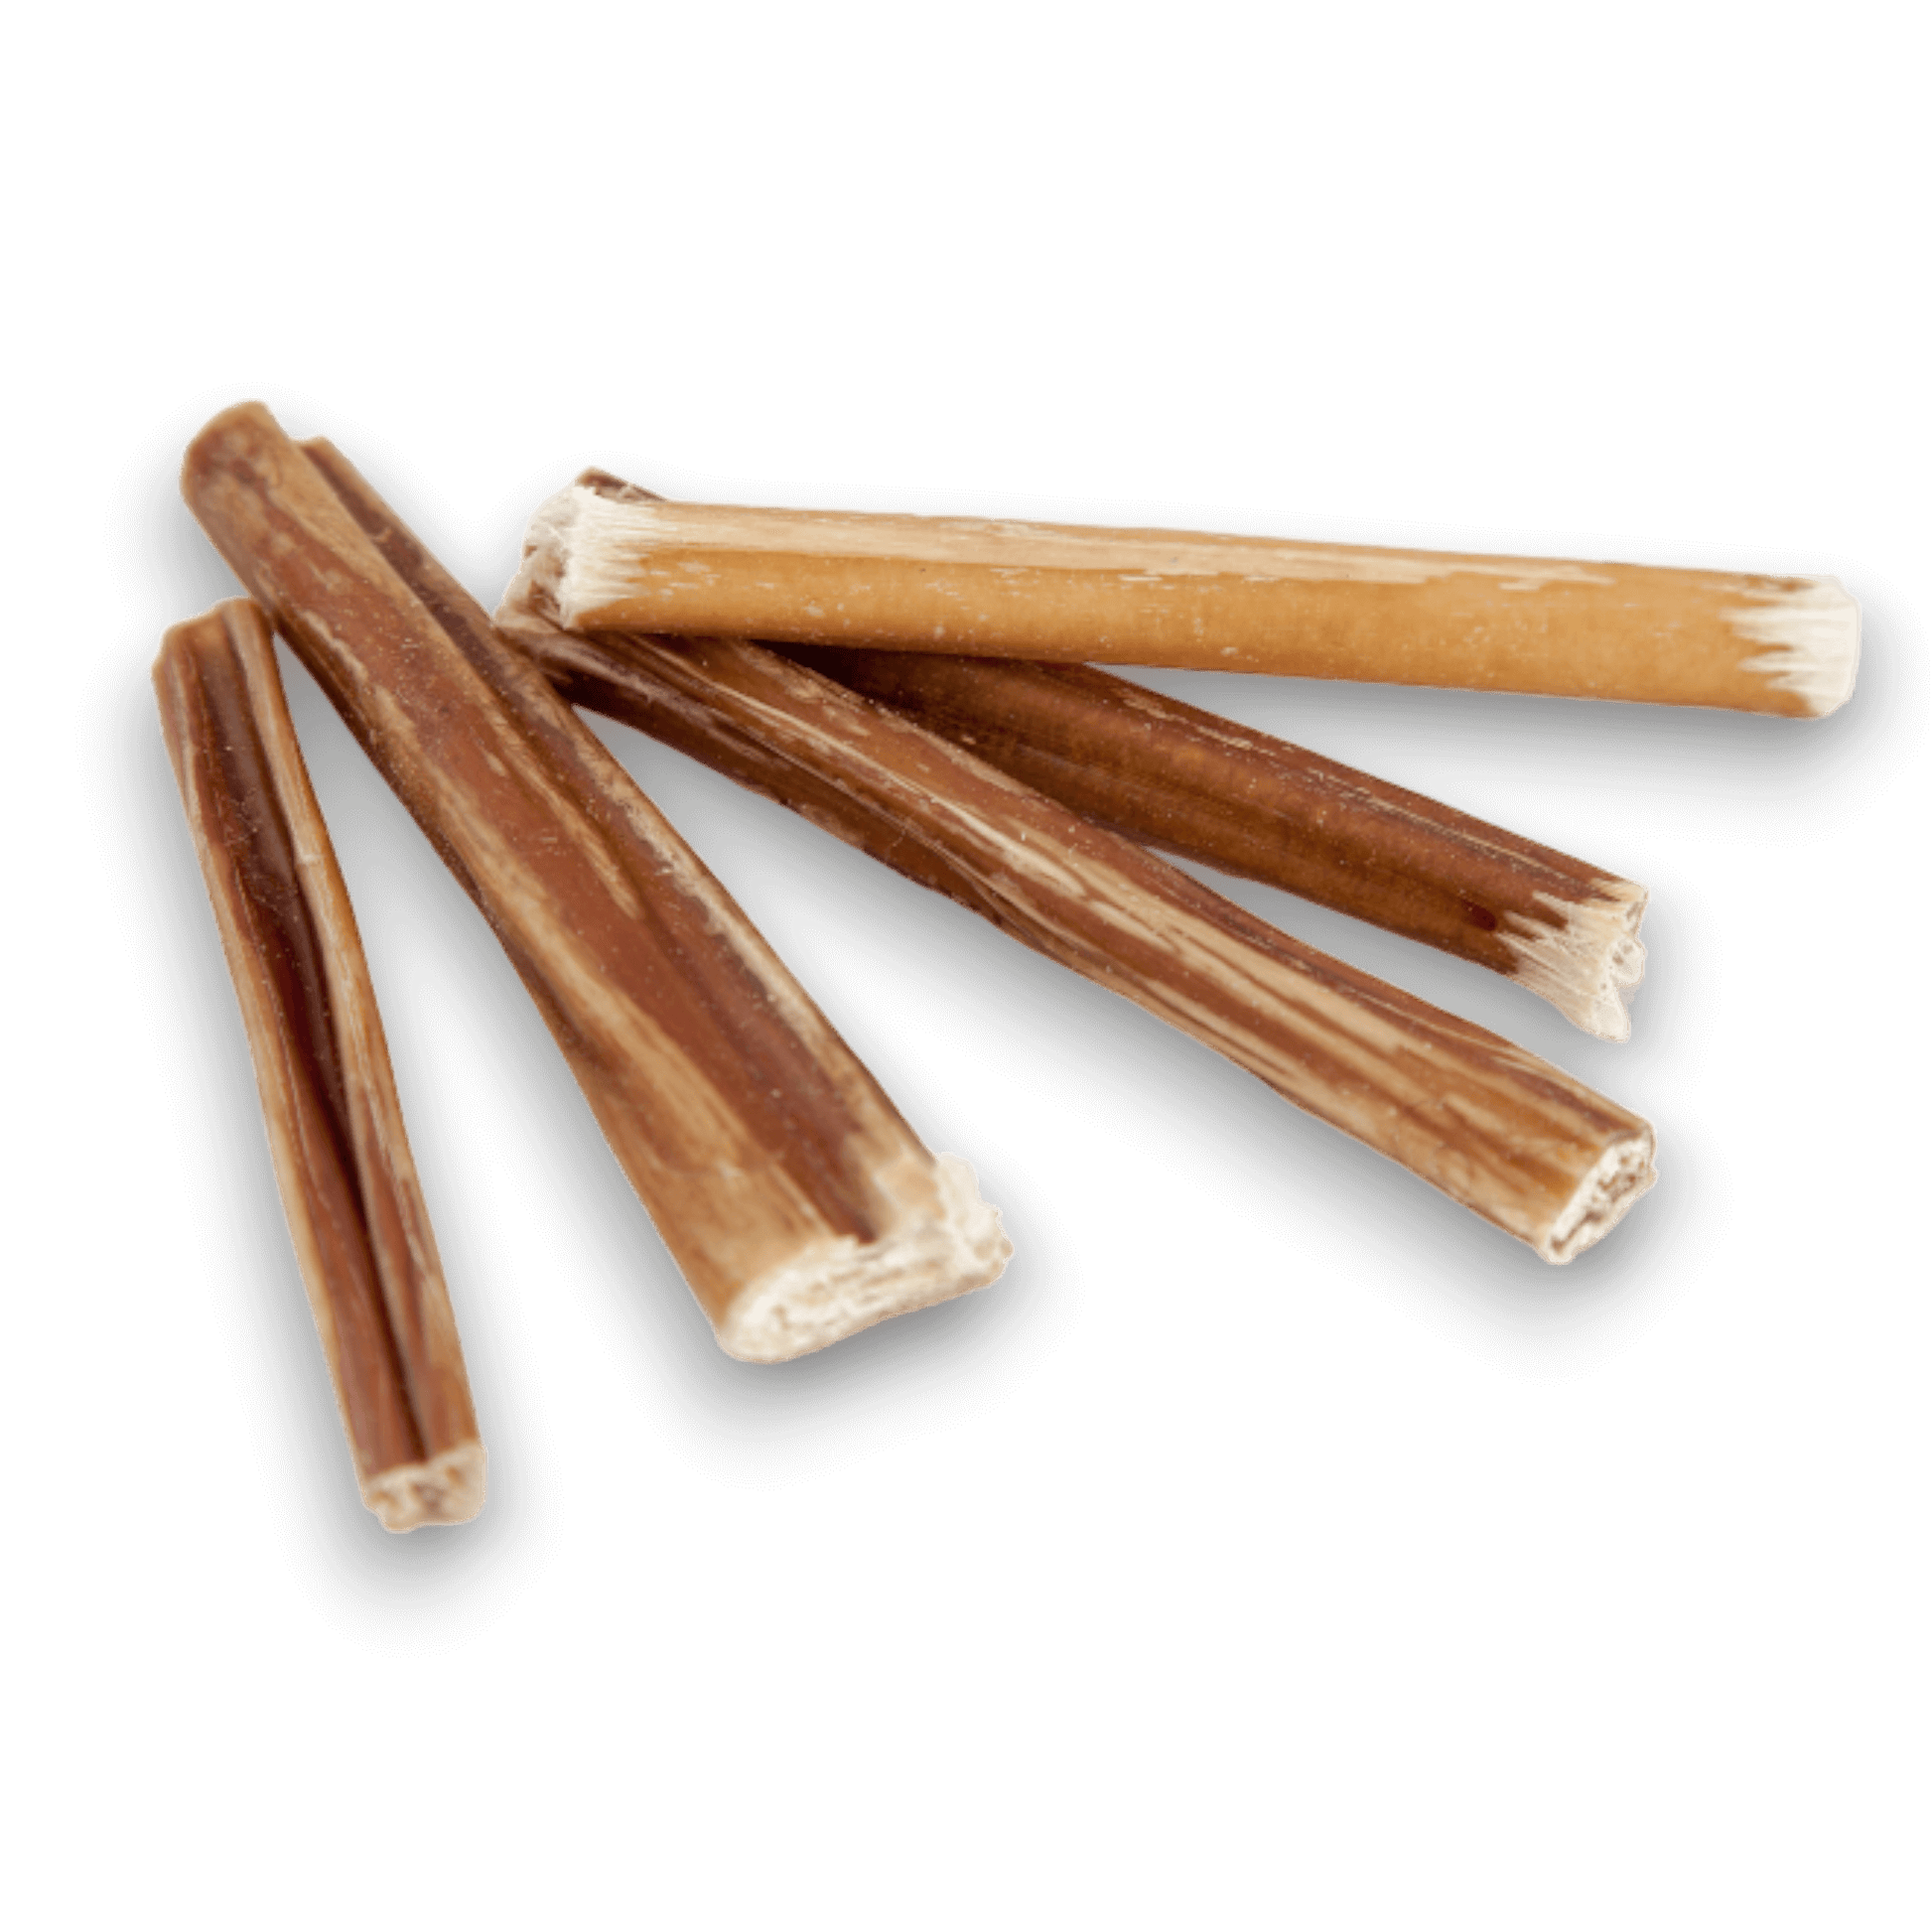 6 inch bully stick dog chews on a transparent background